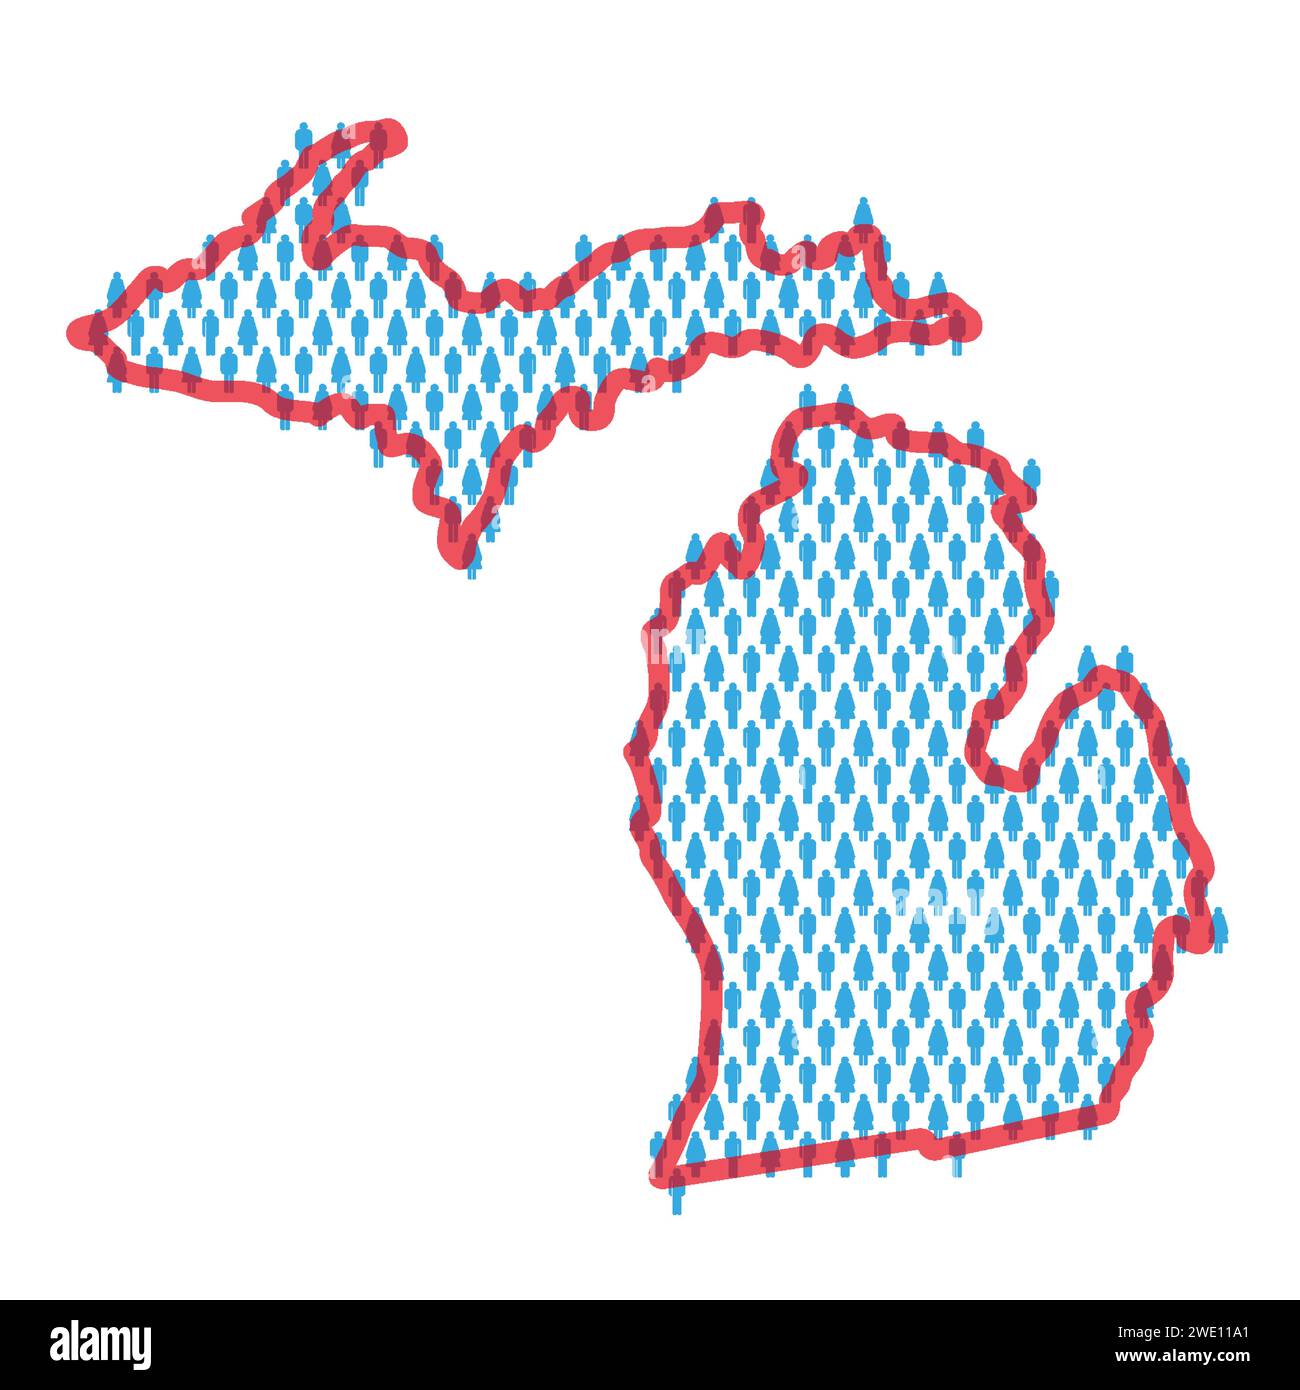 Michigan population map. Stick figures people map with bold red translucent state border. Pattern of men and women icons. Isolated vector illustration Stock Vector